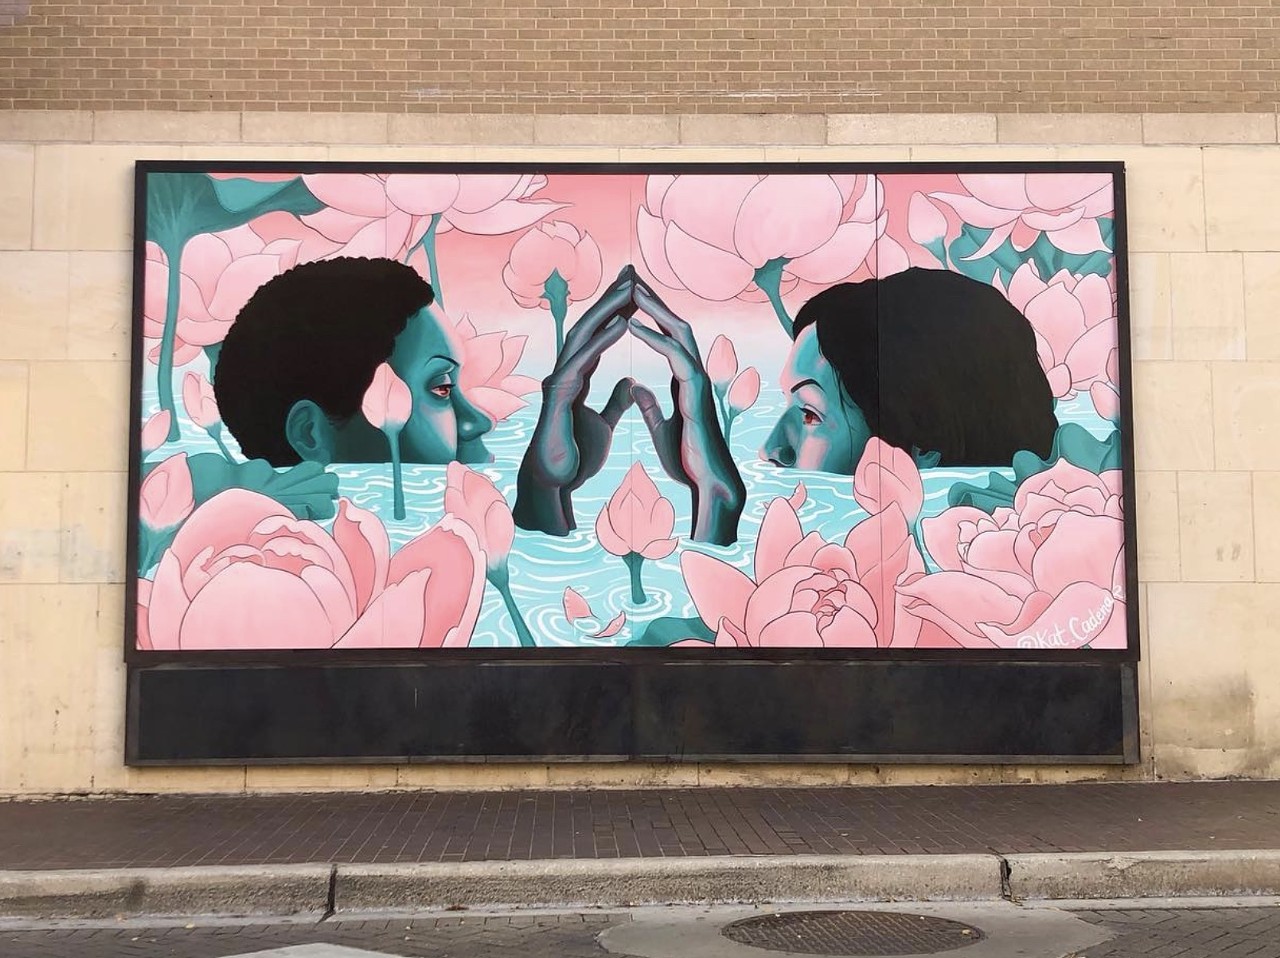 And yet, we bloom
Corner of E. Houston and Navarro streets
Artist: Kat Cadena
This work by artist Kat Cadena was voted Best Mural in the Current's 2020 Best of San Antonio Issue.